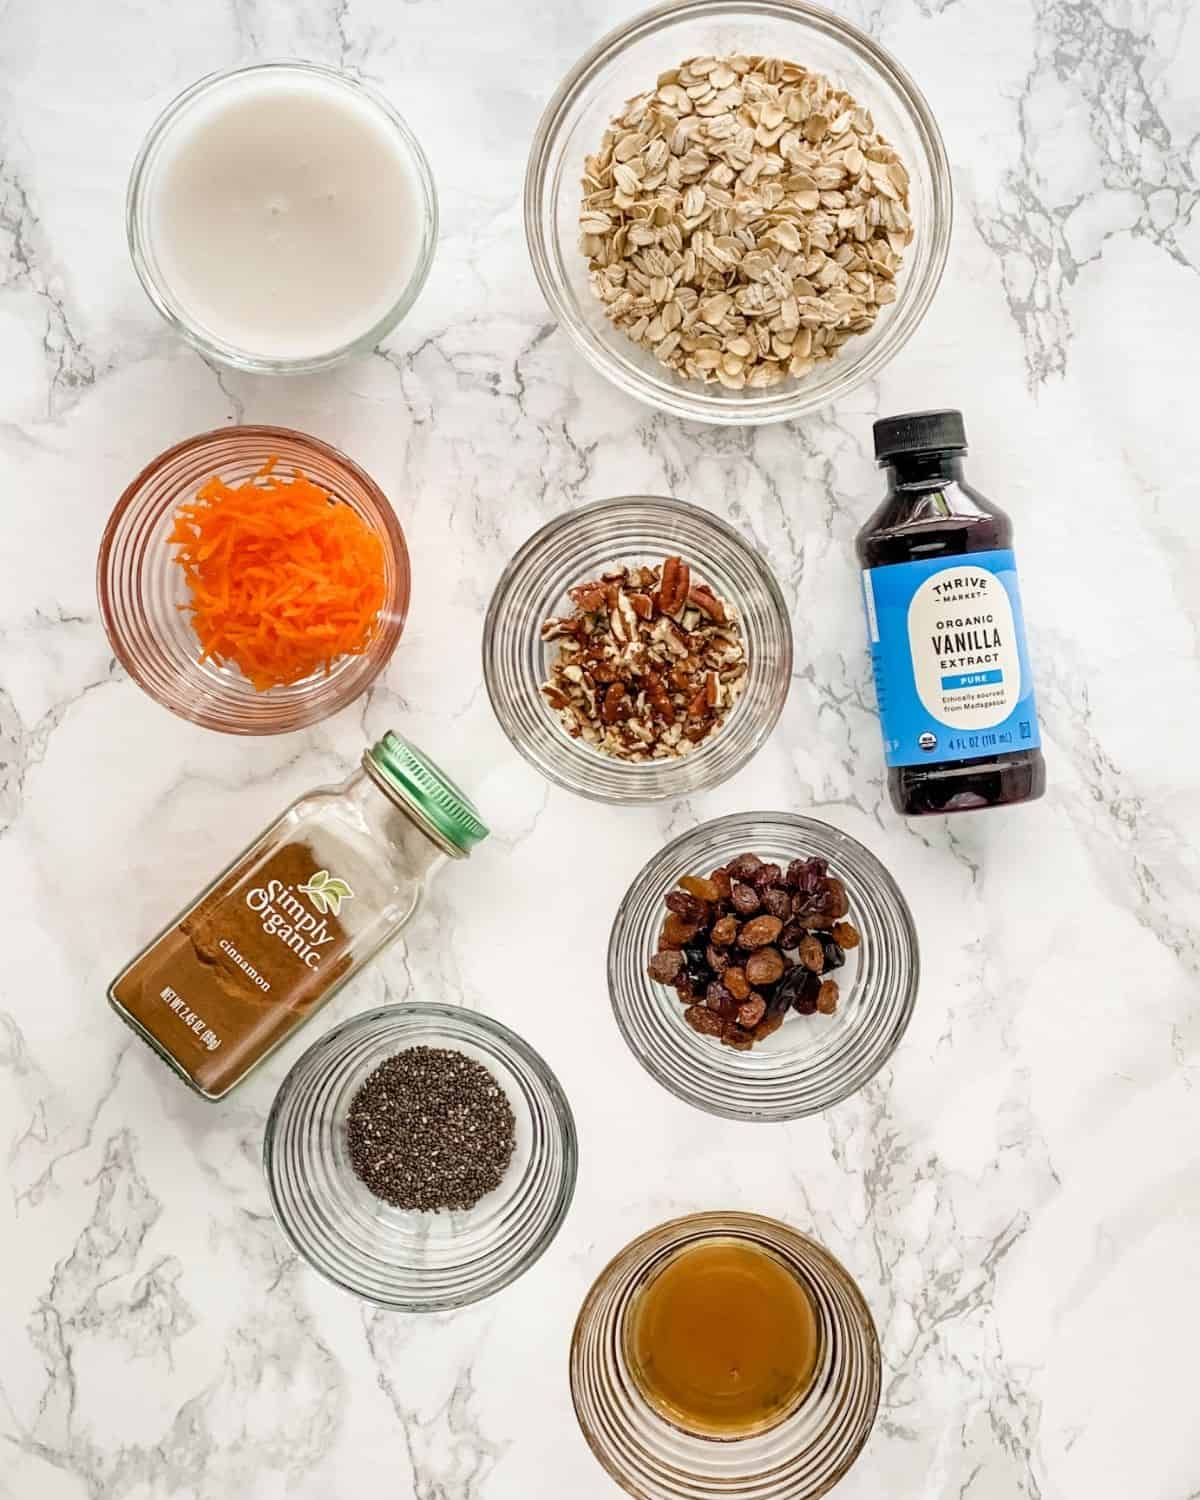 Ingredients for Carrot Cake Overnight Oats